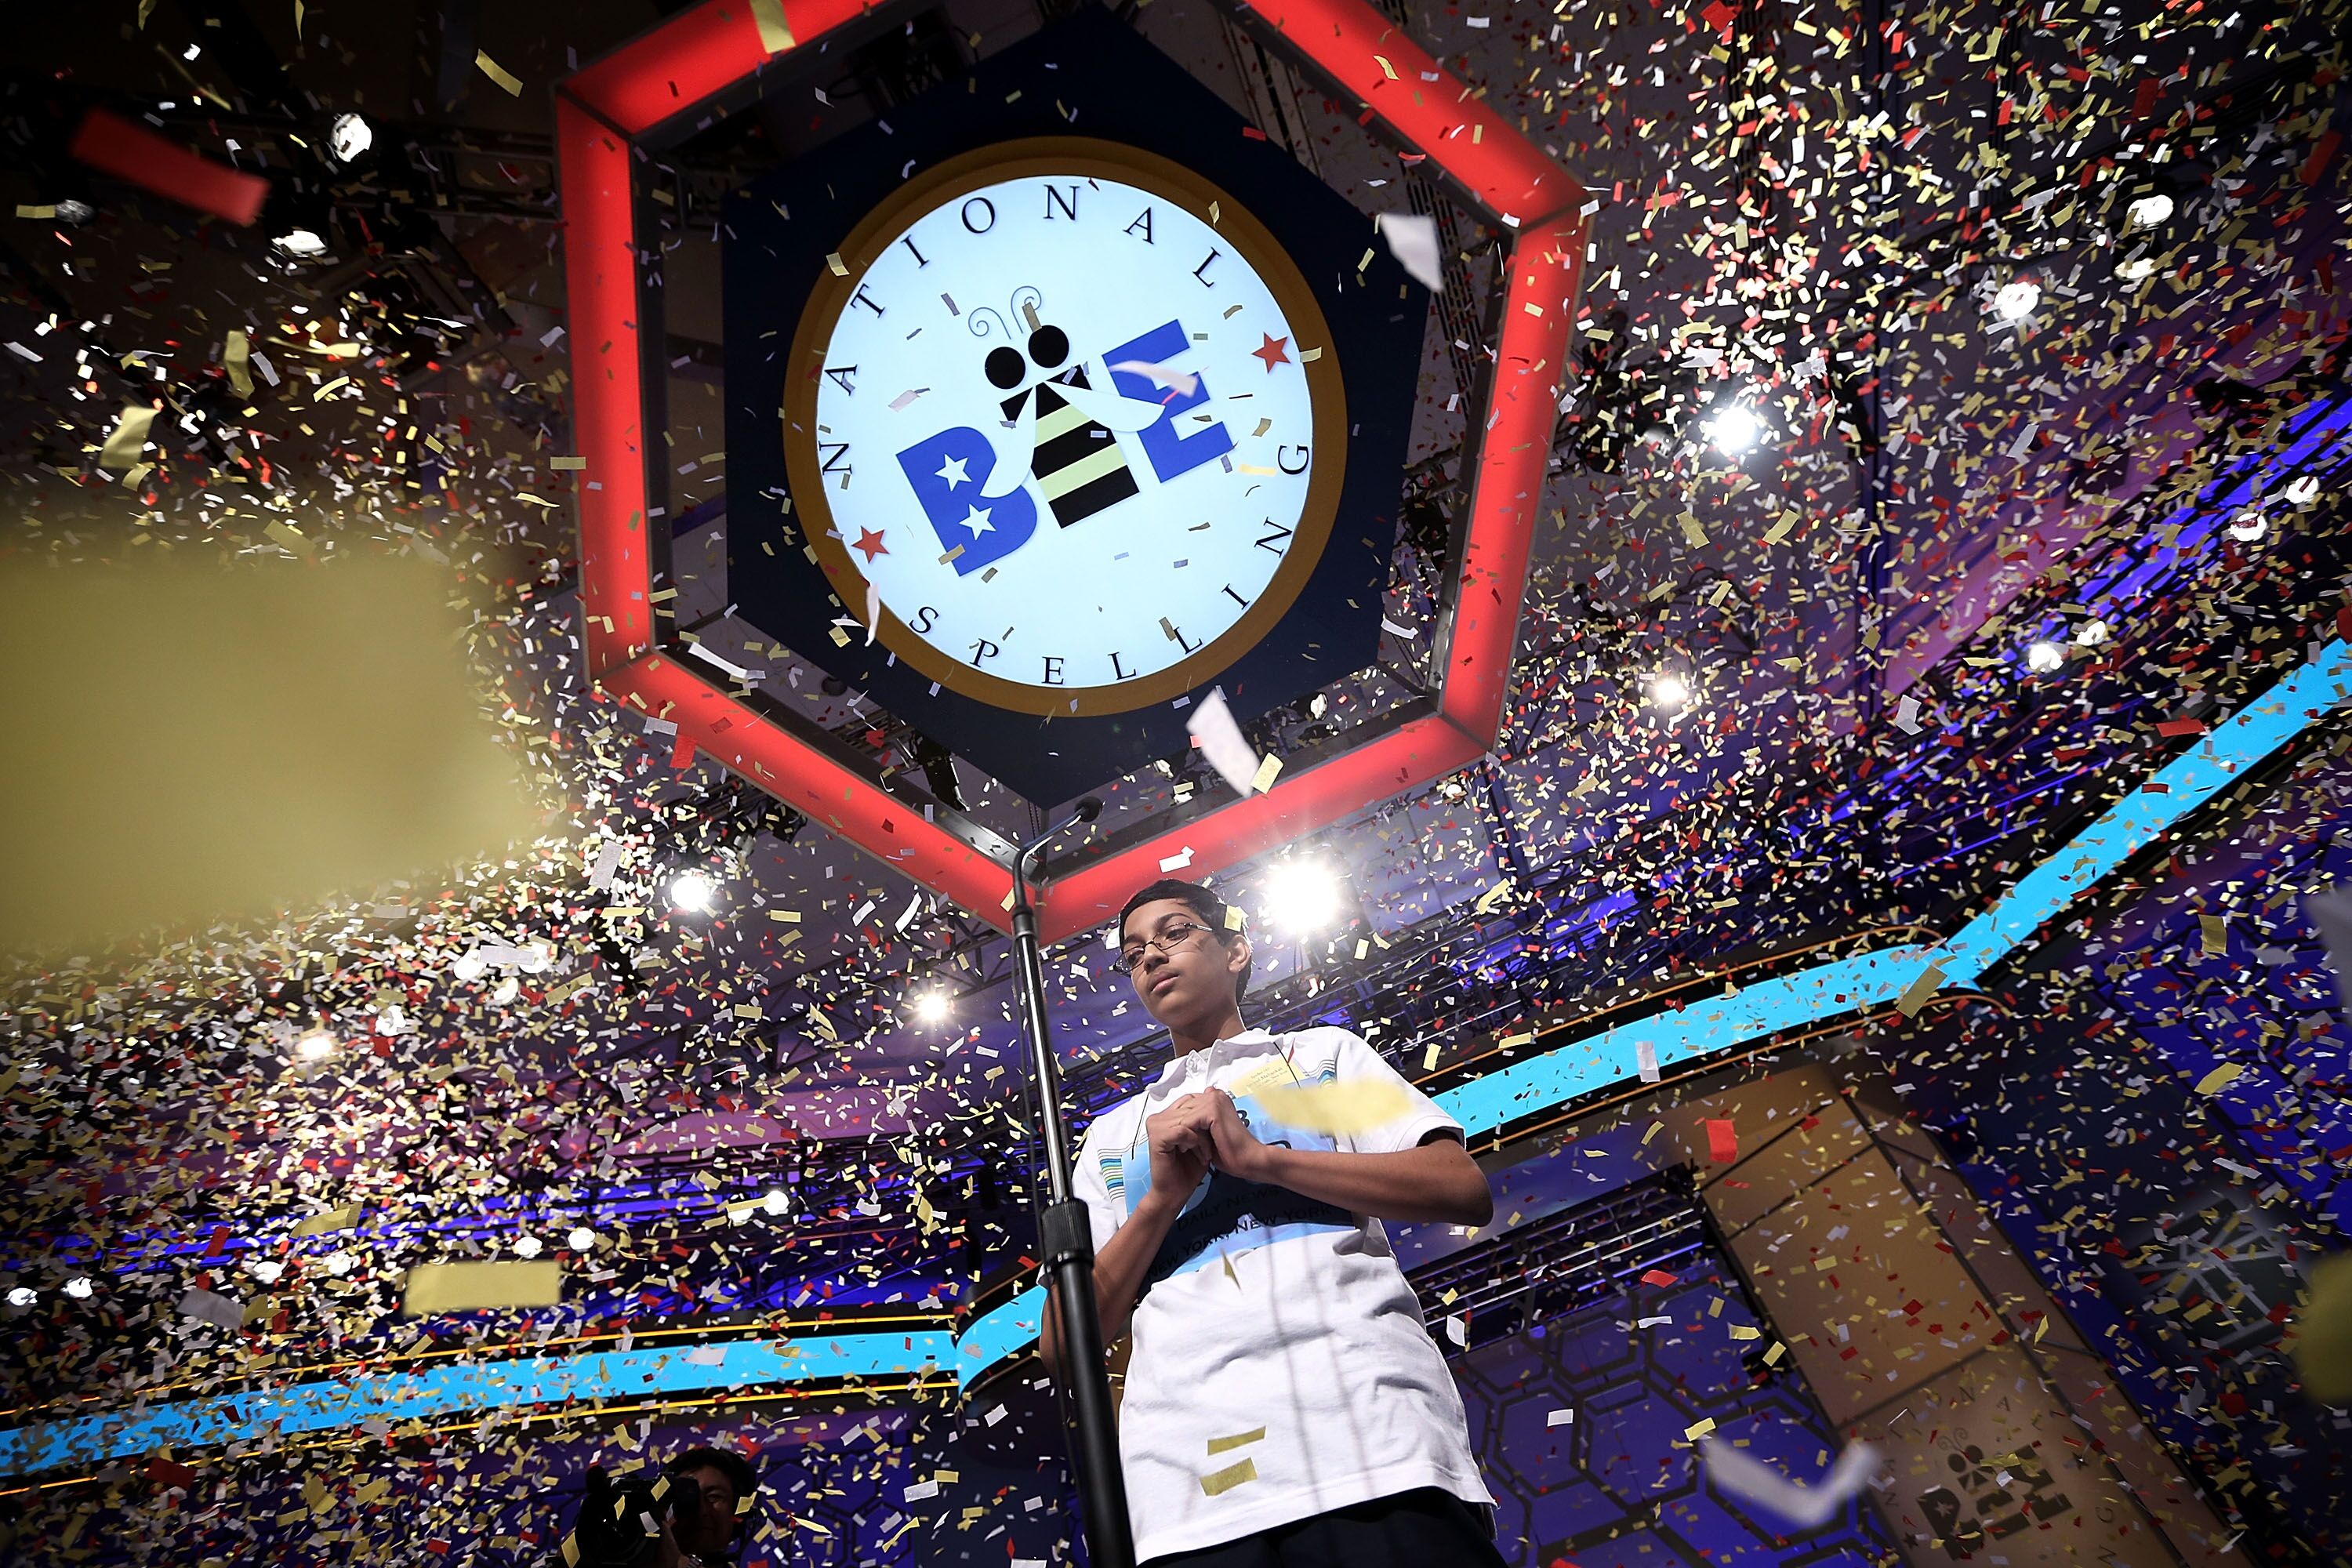 Confetti falls over Arvind Mahankali of Bayside Hills, New York after the finals of the 2013 Scripps National Spelling Bee May 30, 2013 at Gaylord National Resort, Maryland | Photo: Getty Images 